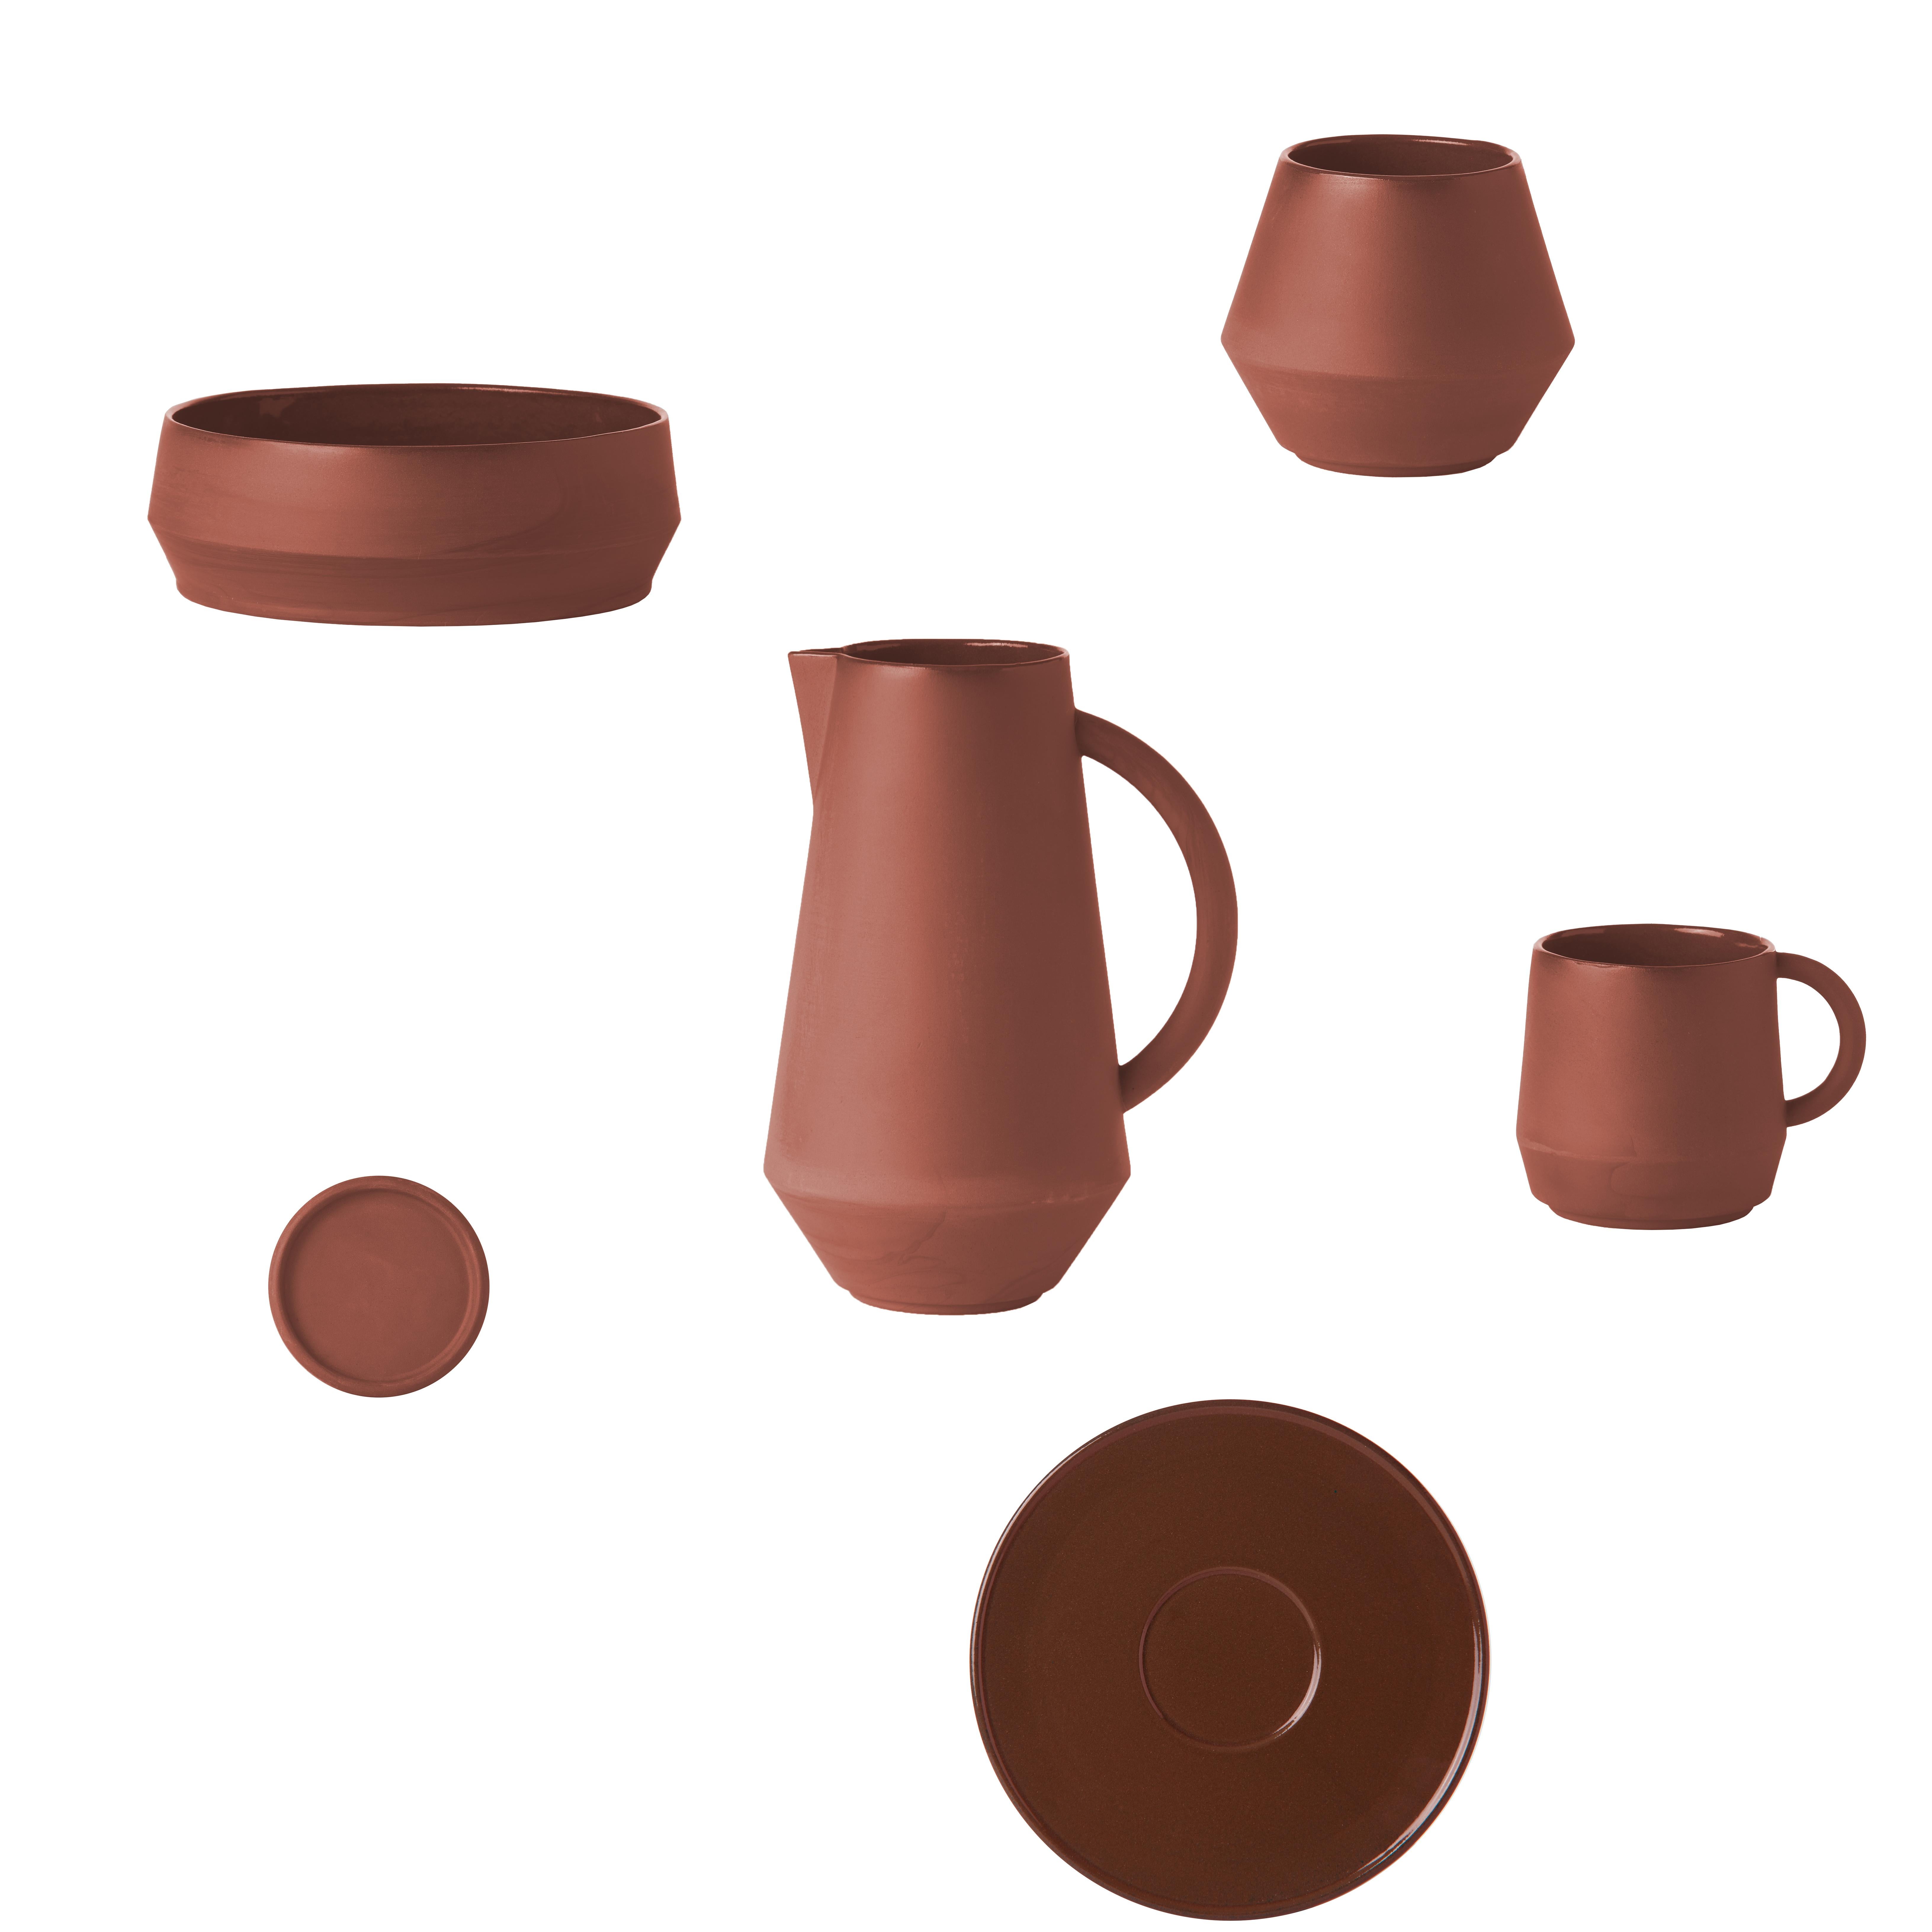 The Unison set is a ceramic tableware collection with seven different pieces. It consists of a carafe, big and small plate, soup bowl, sugar bowl, cup and a universal fitting lid. The ceramic is dyed with pigments and available in five special